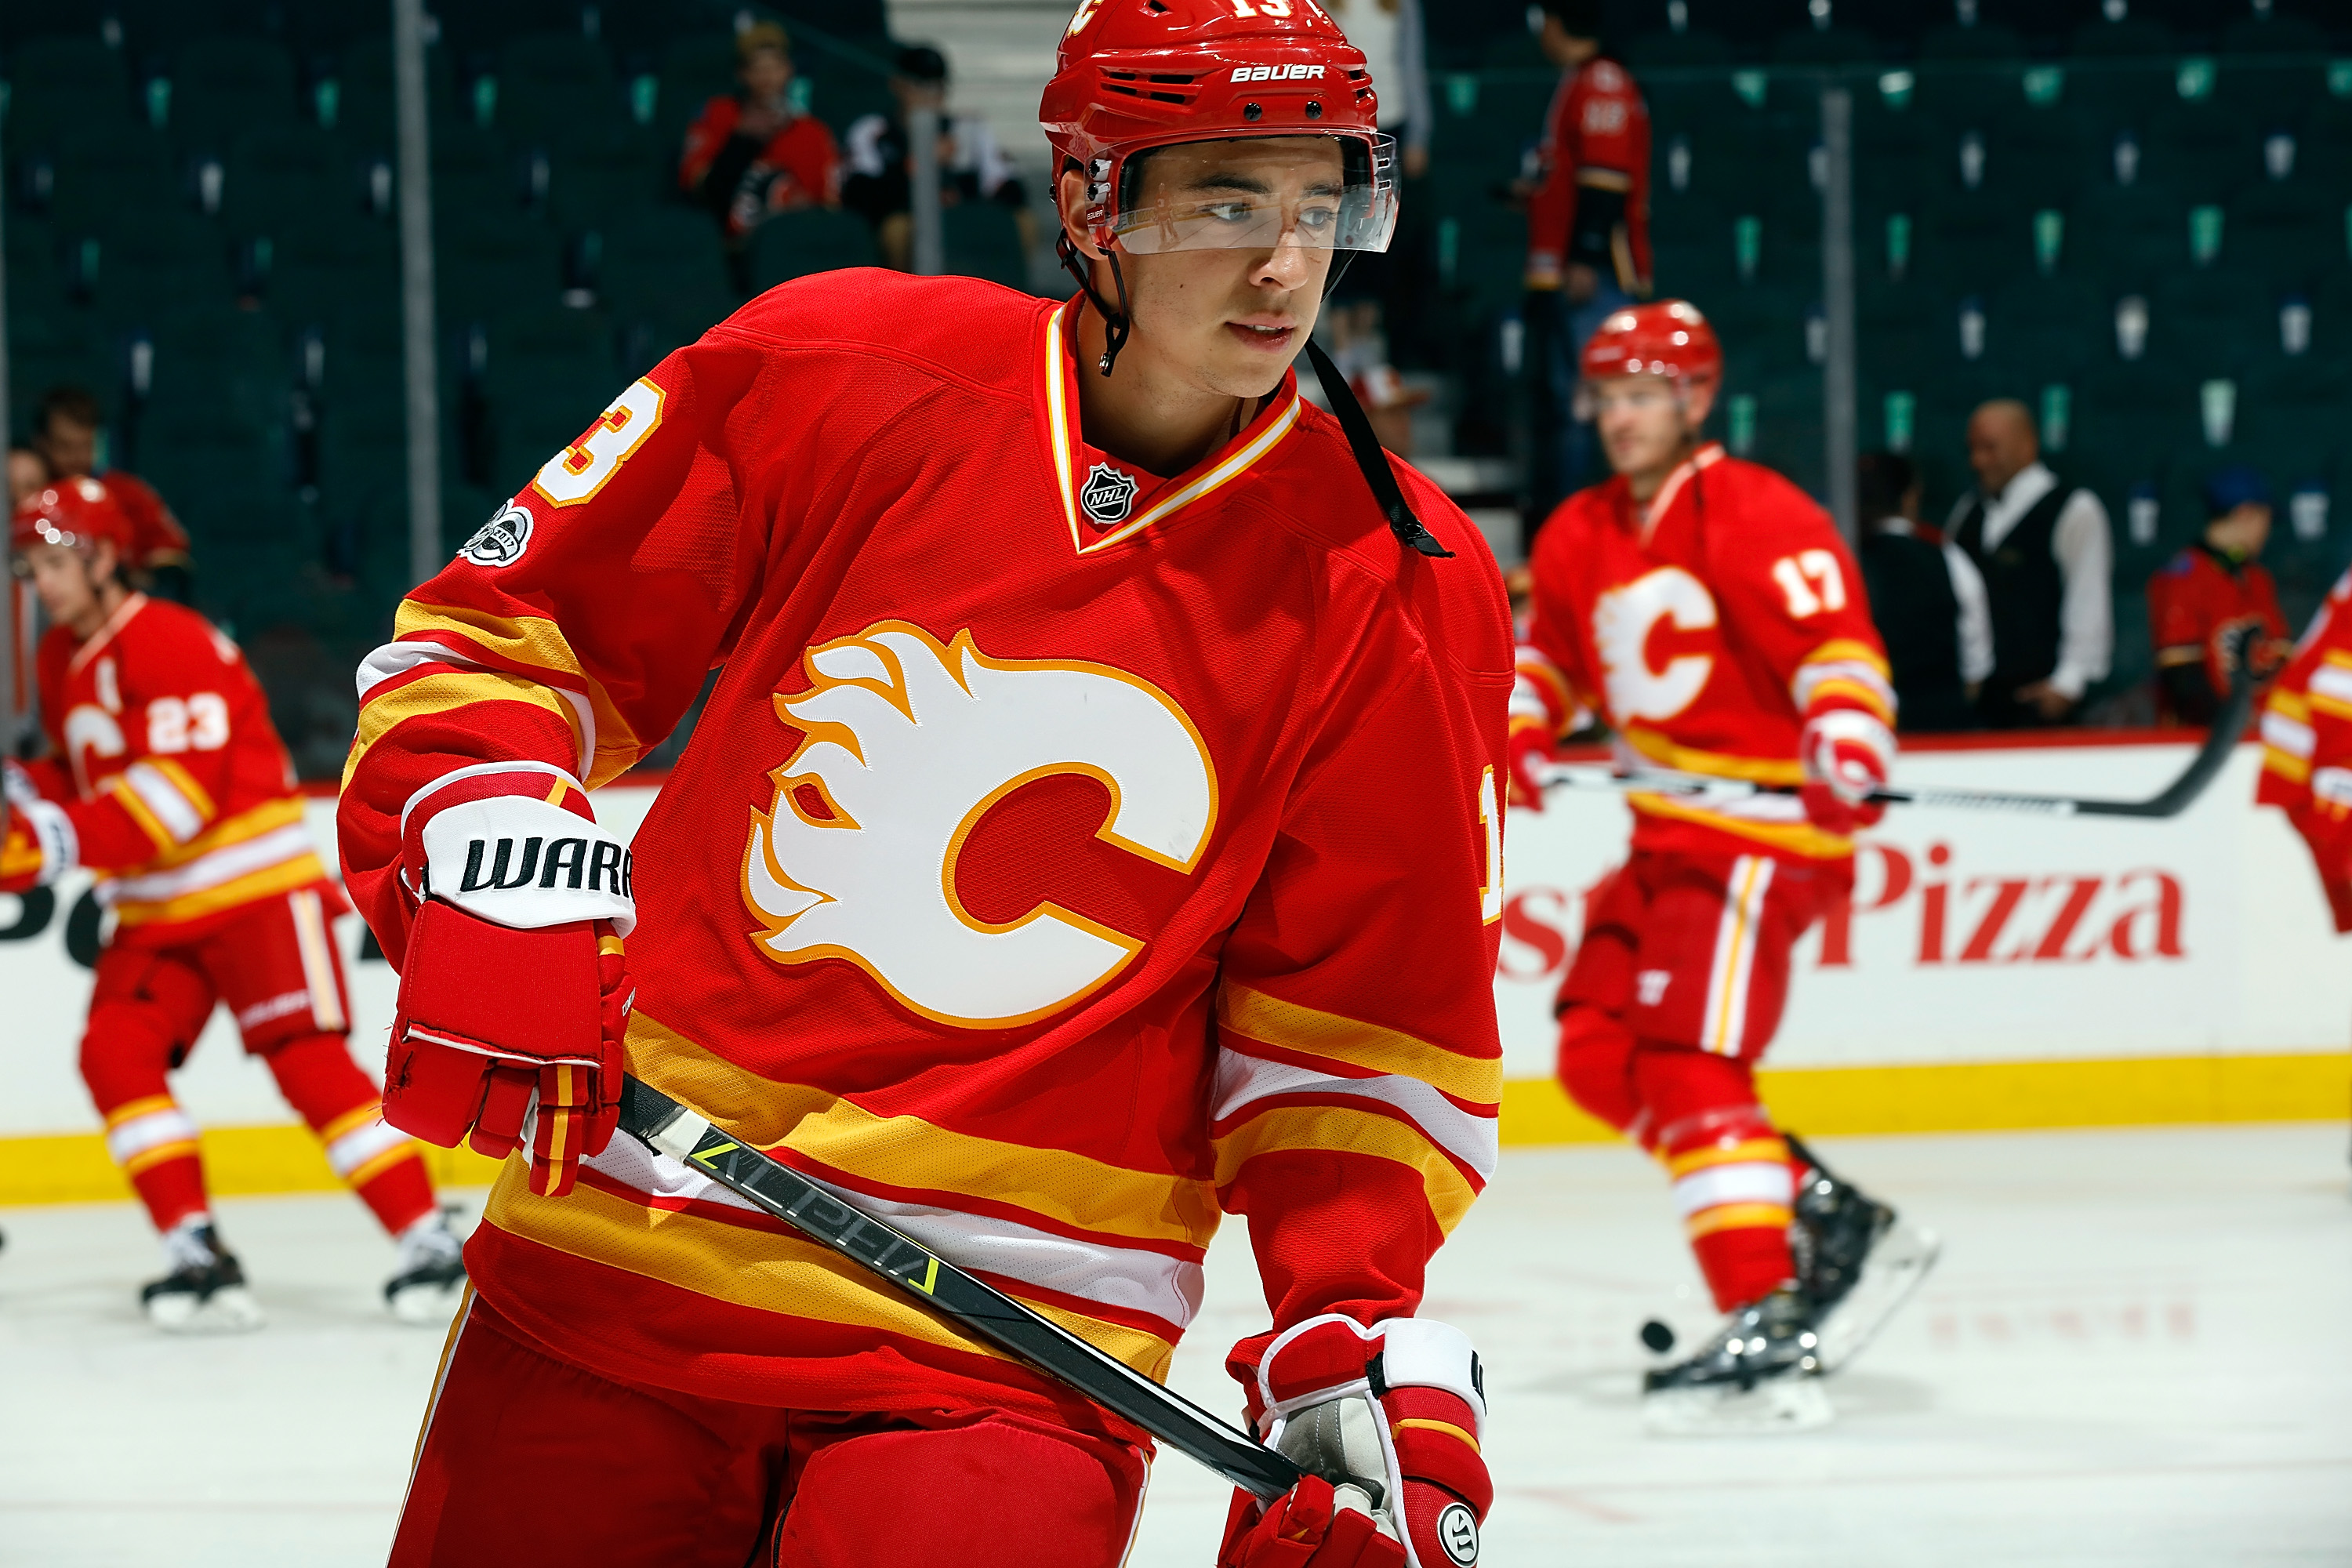 Calgary Flames - The best there is, the best there was